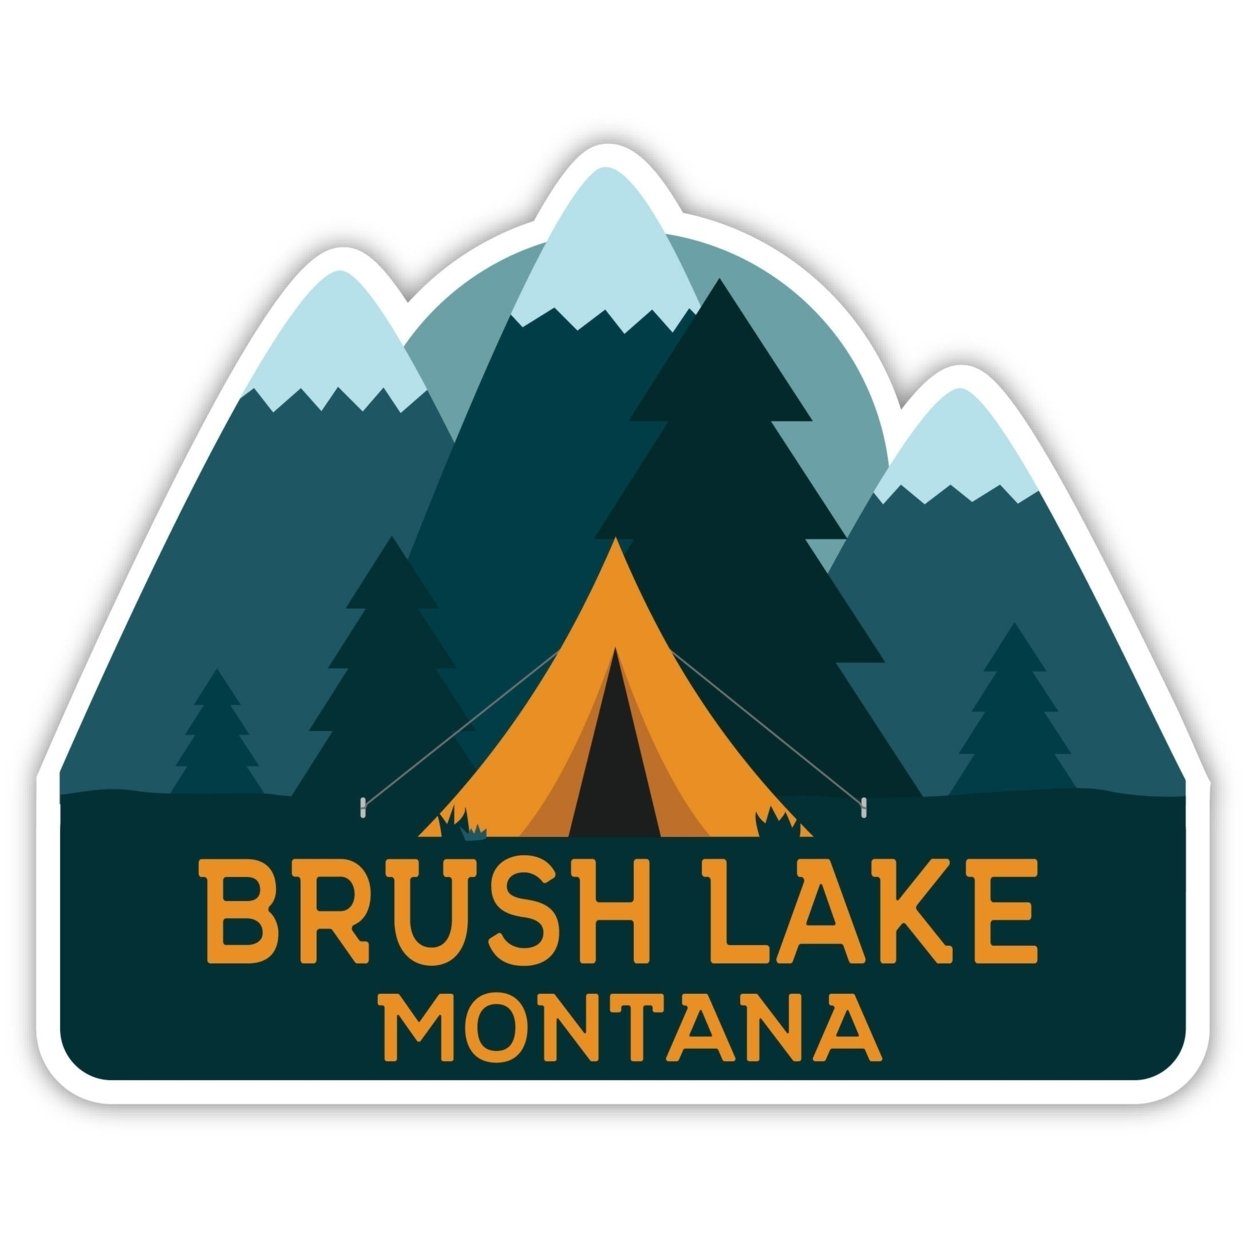 Brush Lake Montana Souvenir Decorative Stickers (Choose Theme And Size) - 4-Pack, 12-Inch, Tent